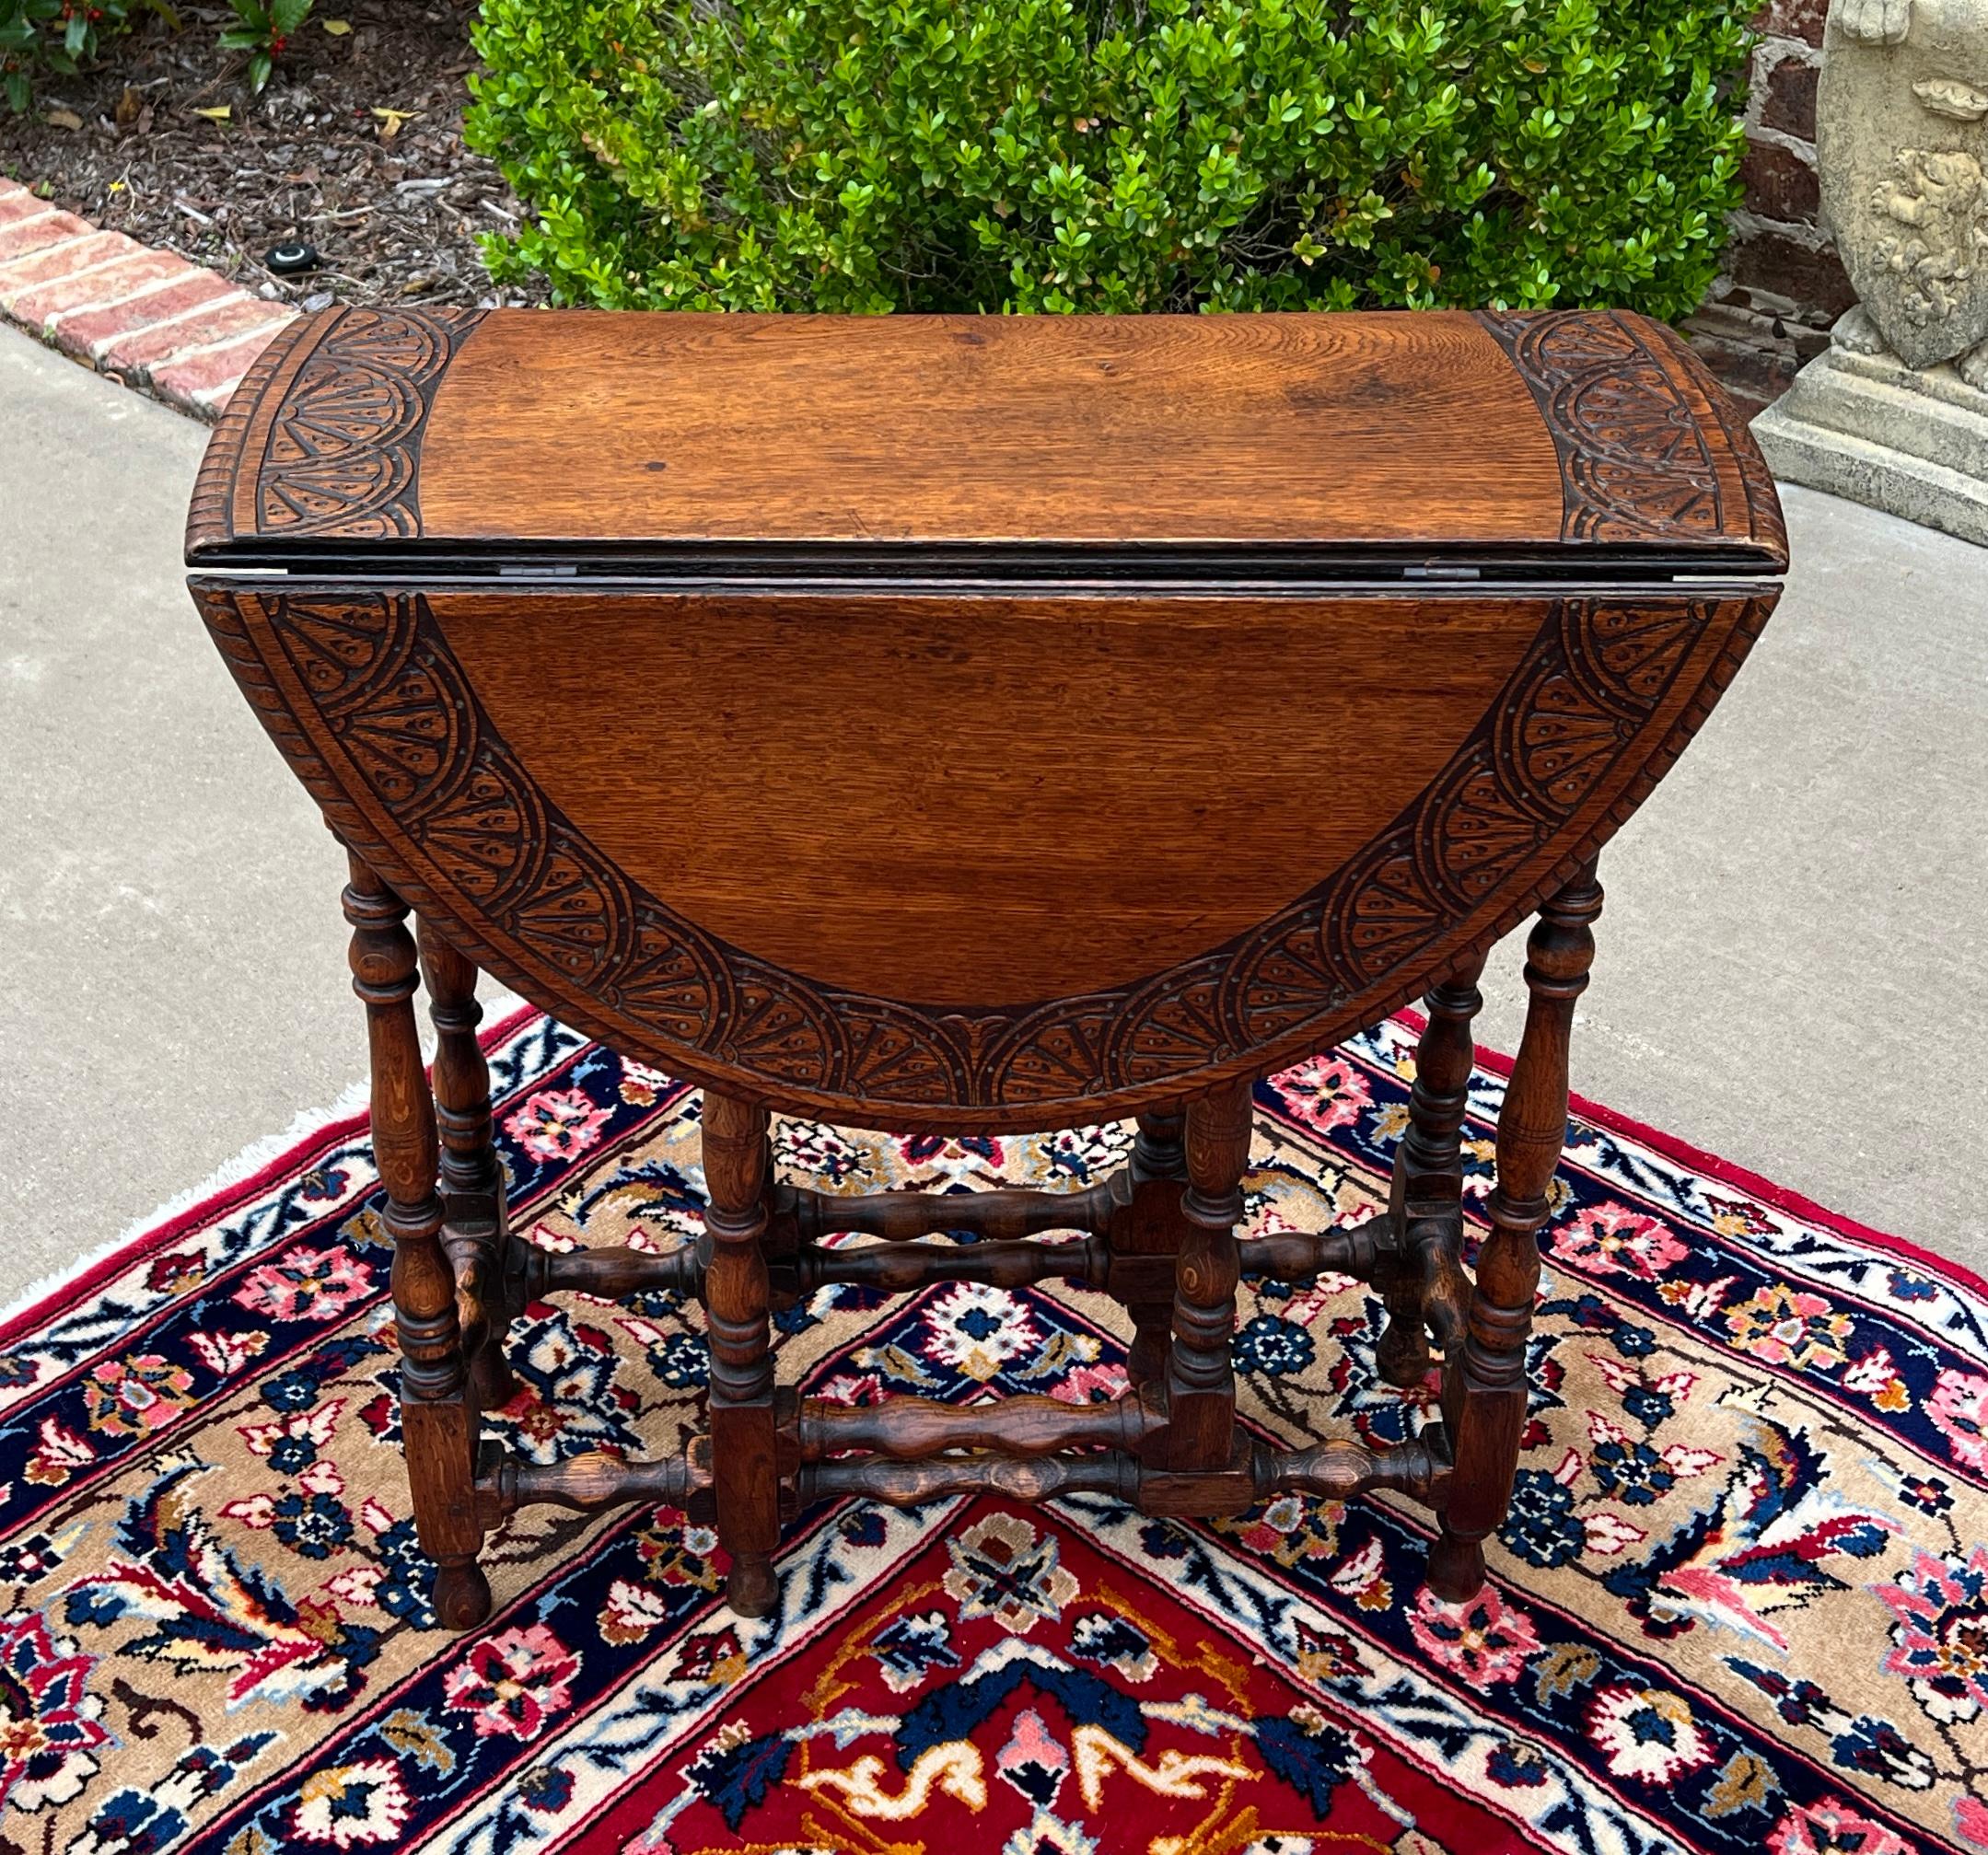 CHARMING Antique English Oak Drop Leaf  Gateleg Oval Table~~CARVED TOP~~Turned Post  Legs ~~c. 1920s  


        Always in high demand~~hard-to-find drop leaf table with turned post legs

        Solid and sturdy with very nice oak patina 

       